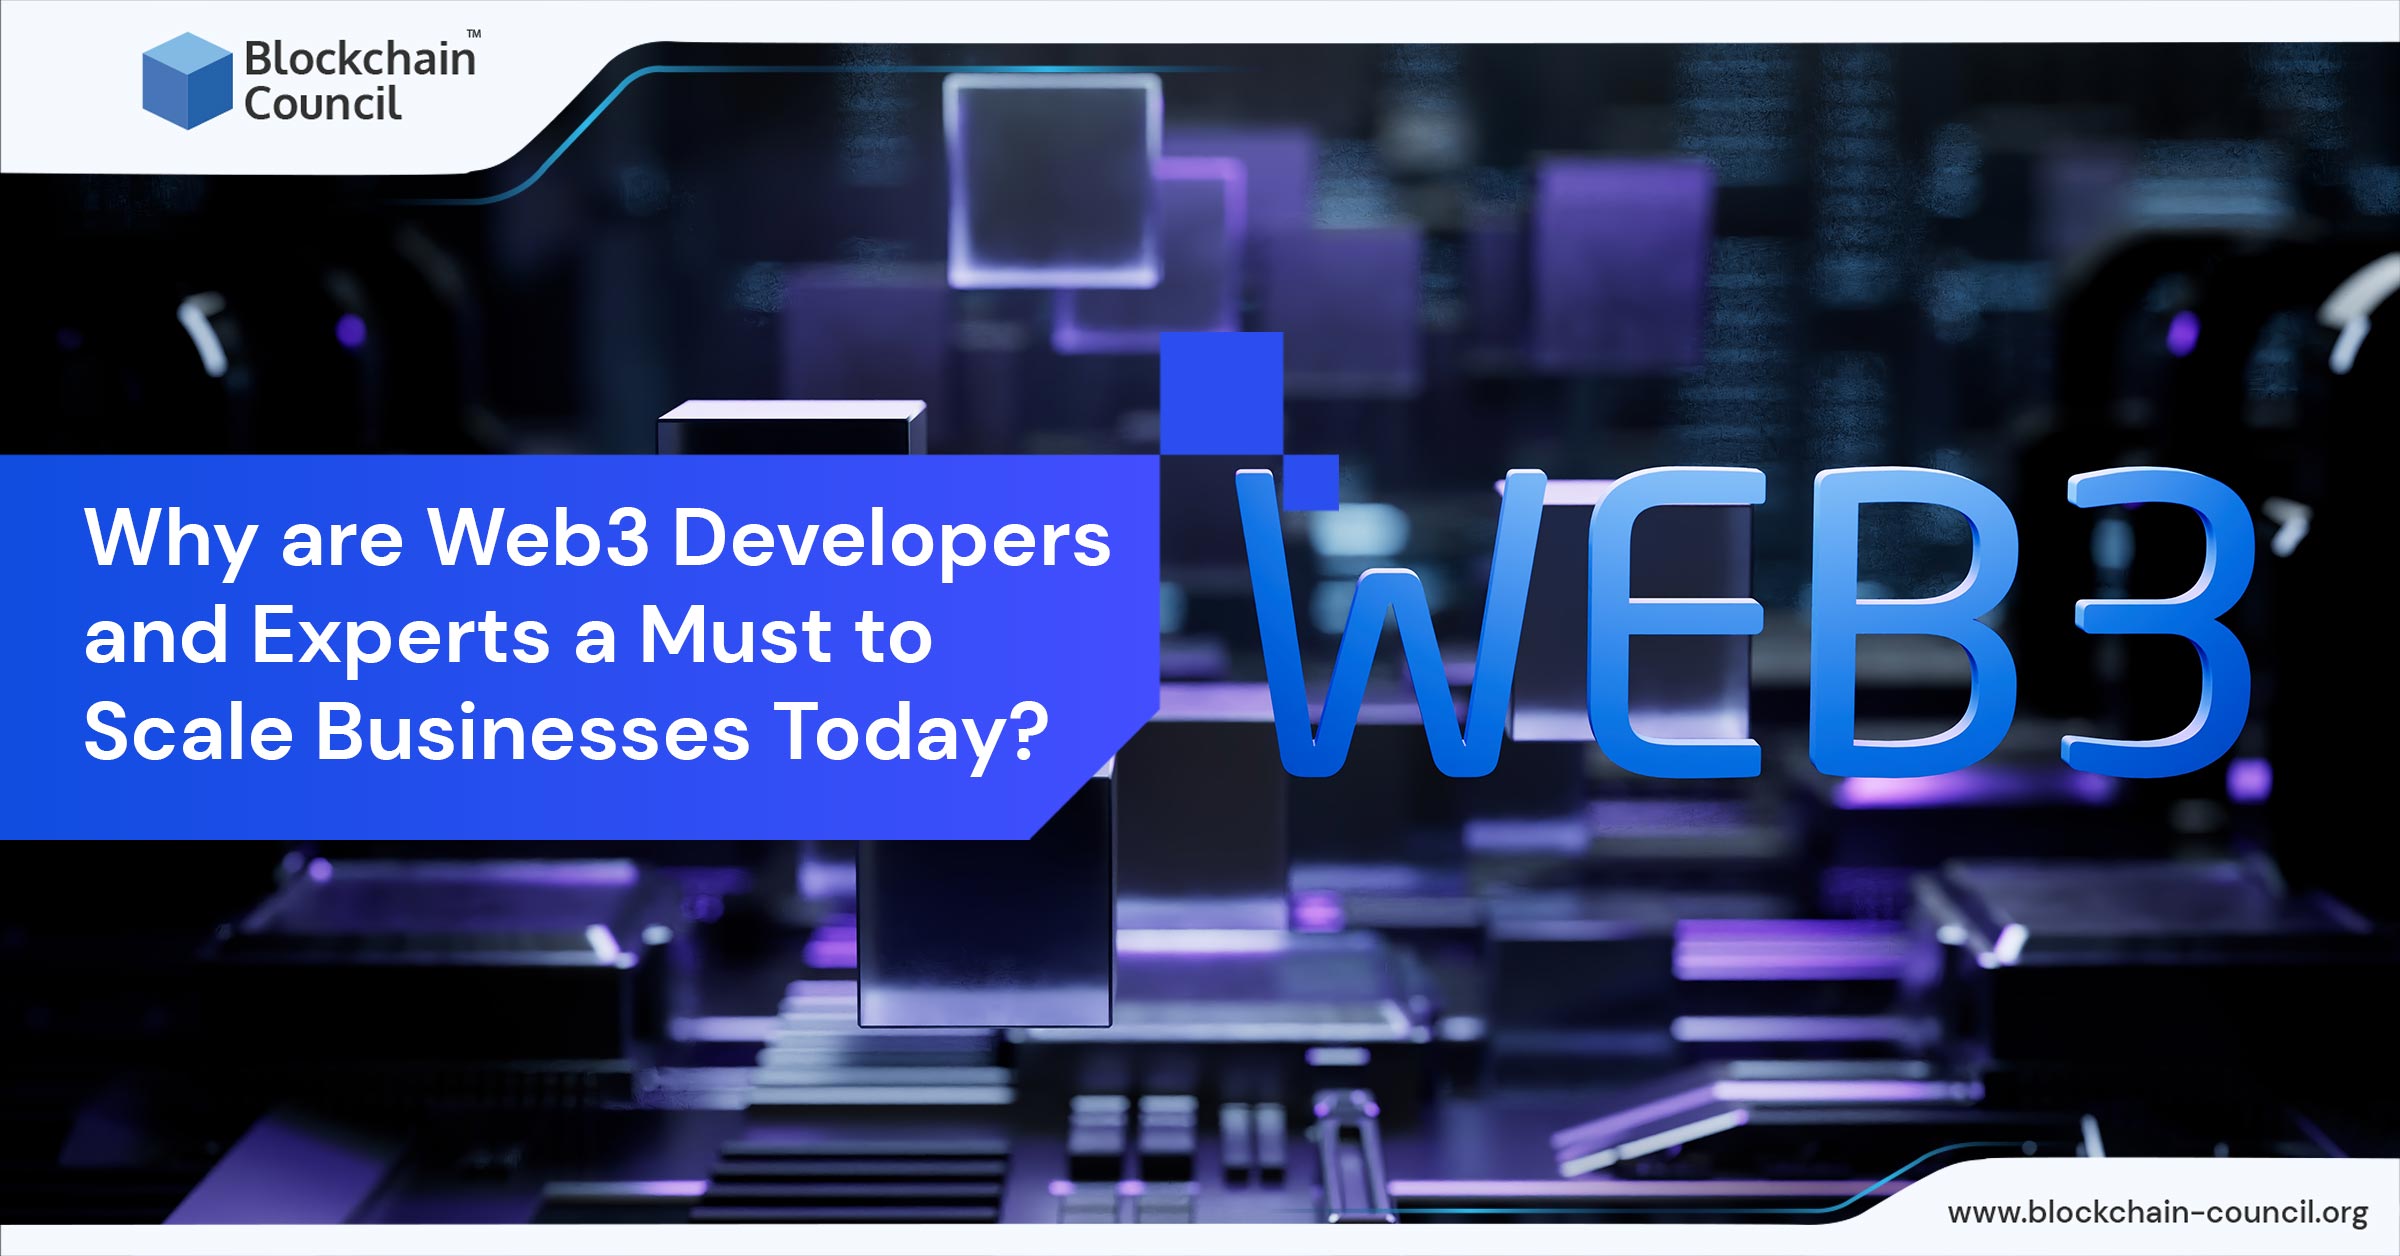 Why are Web3 Developers and Experts a Must to Scale Businesses Today?